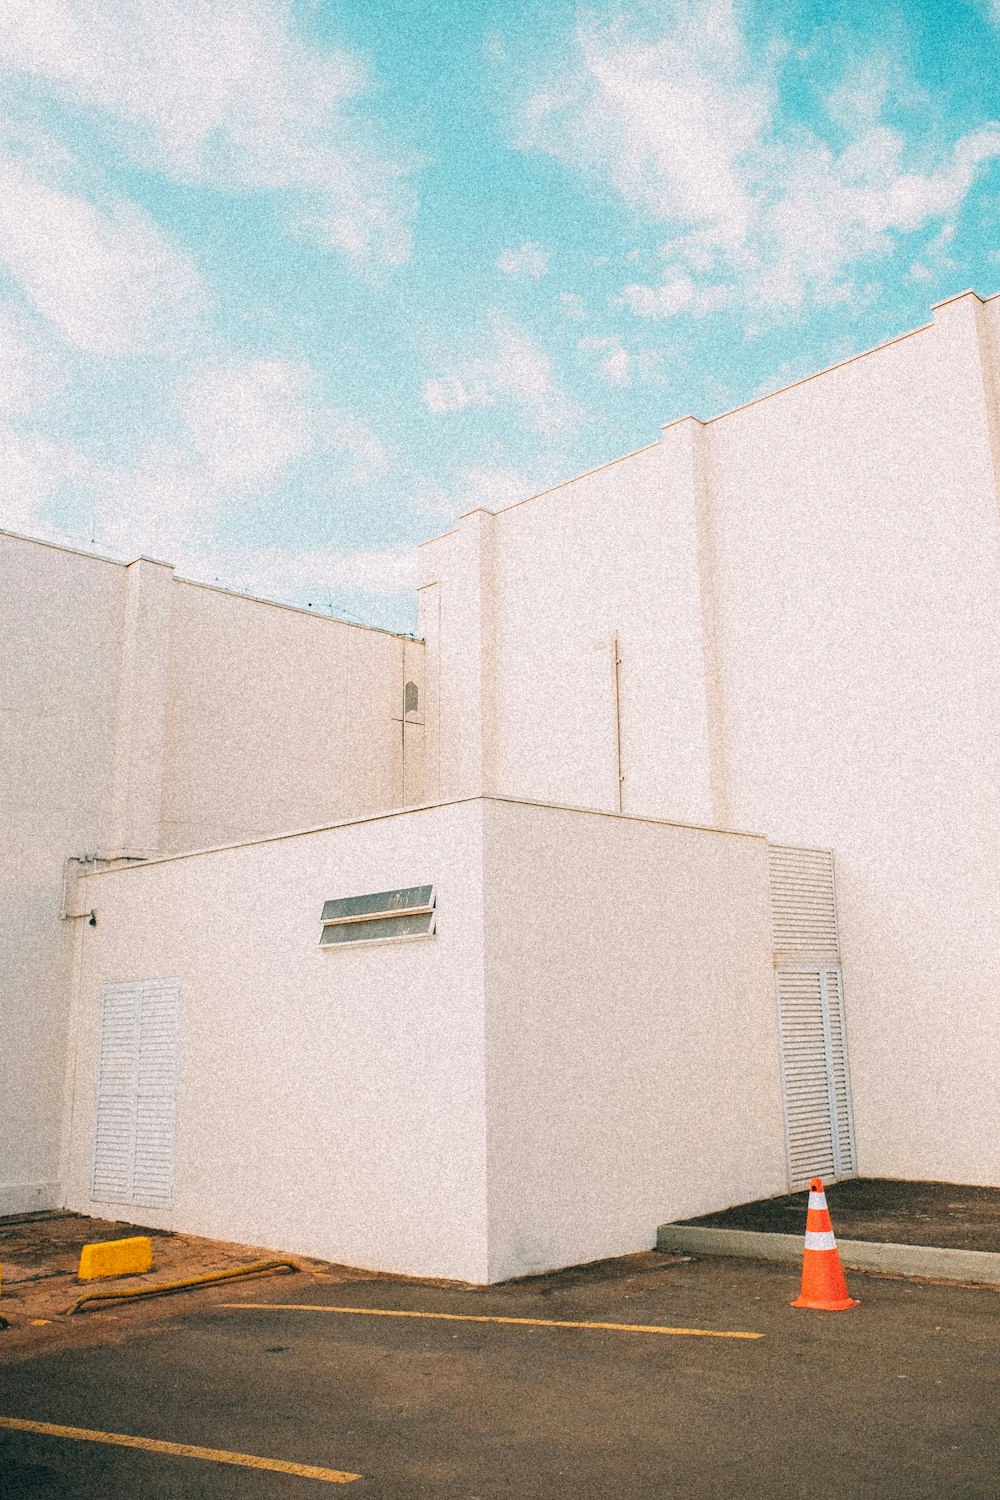 a parking lot with a white building and orange cones